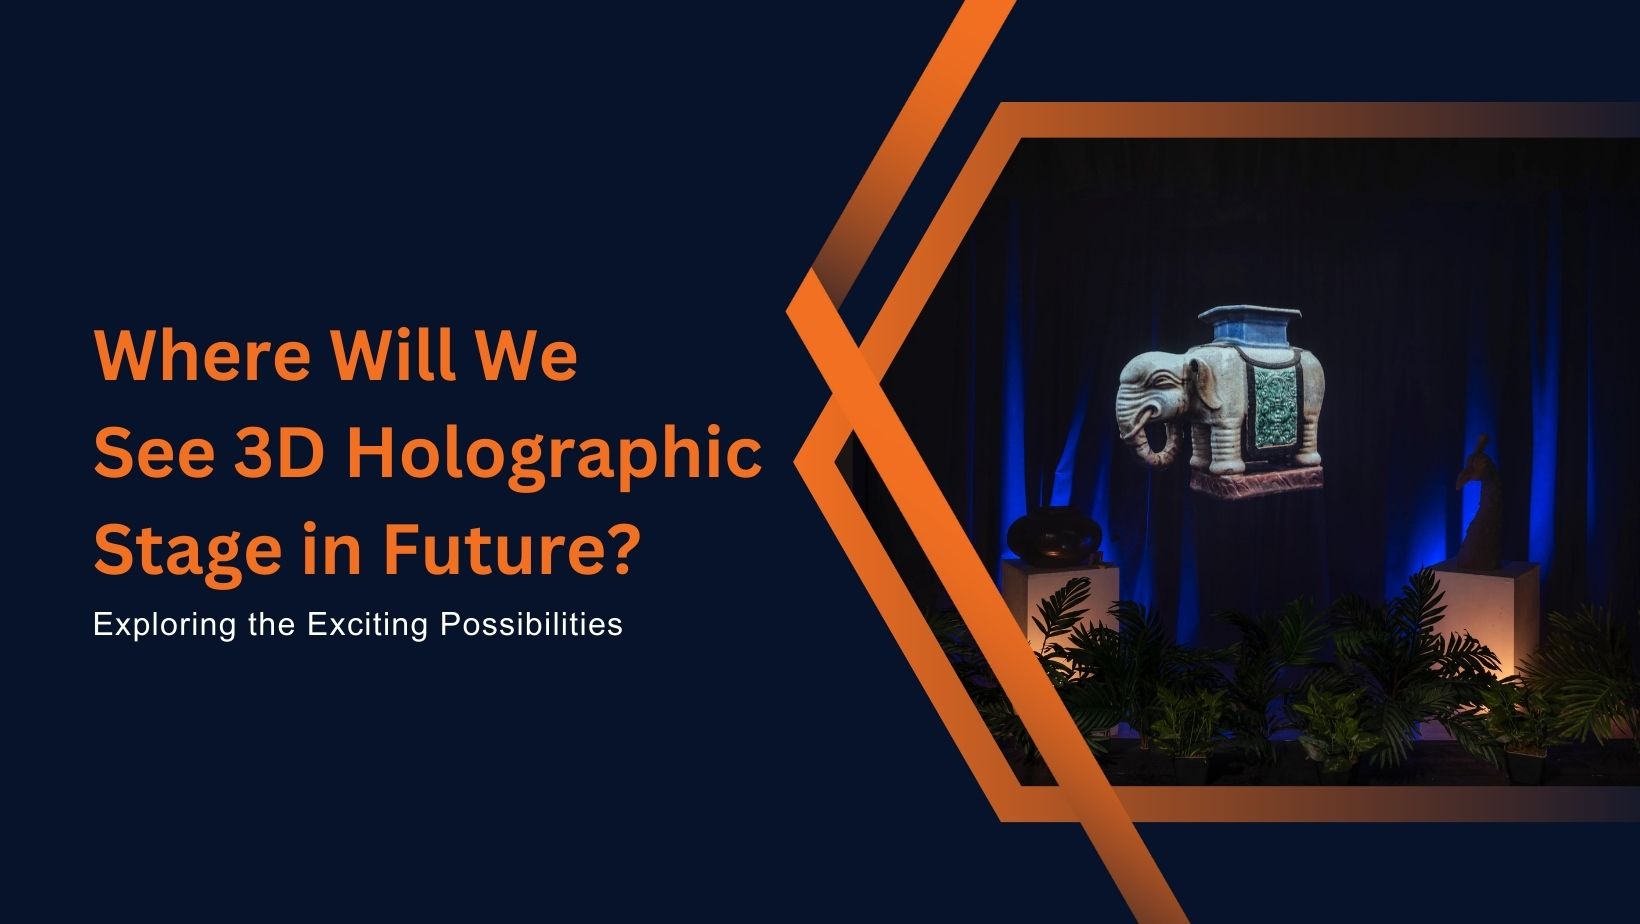 Where Will We See 3D Holographic Stages in the Future? Exploring the Exciting Possibilities